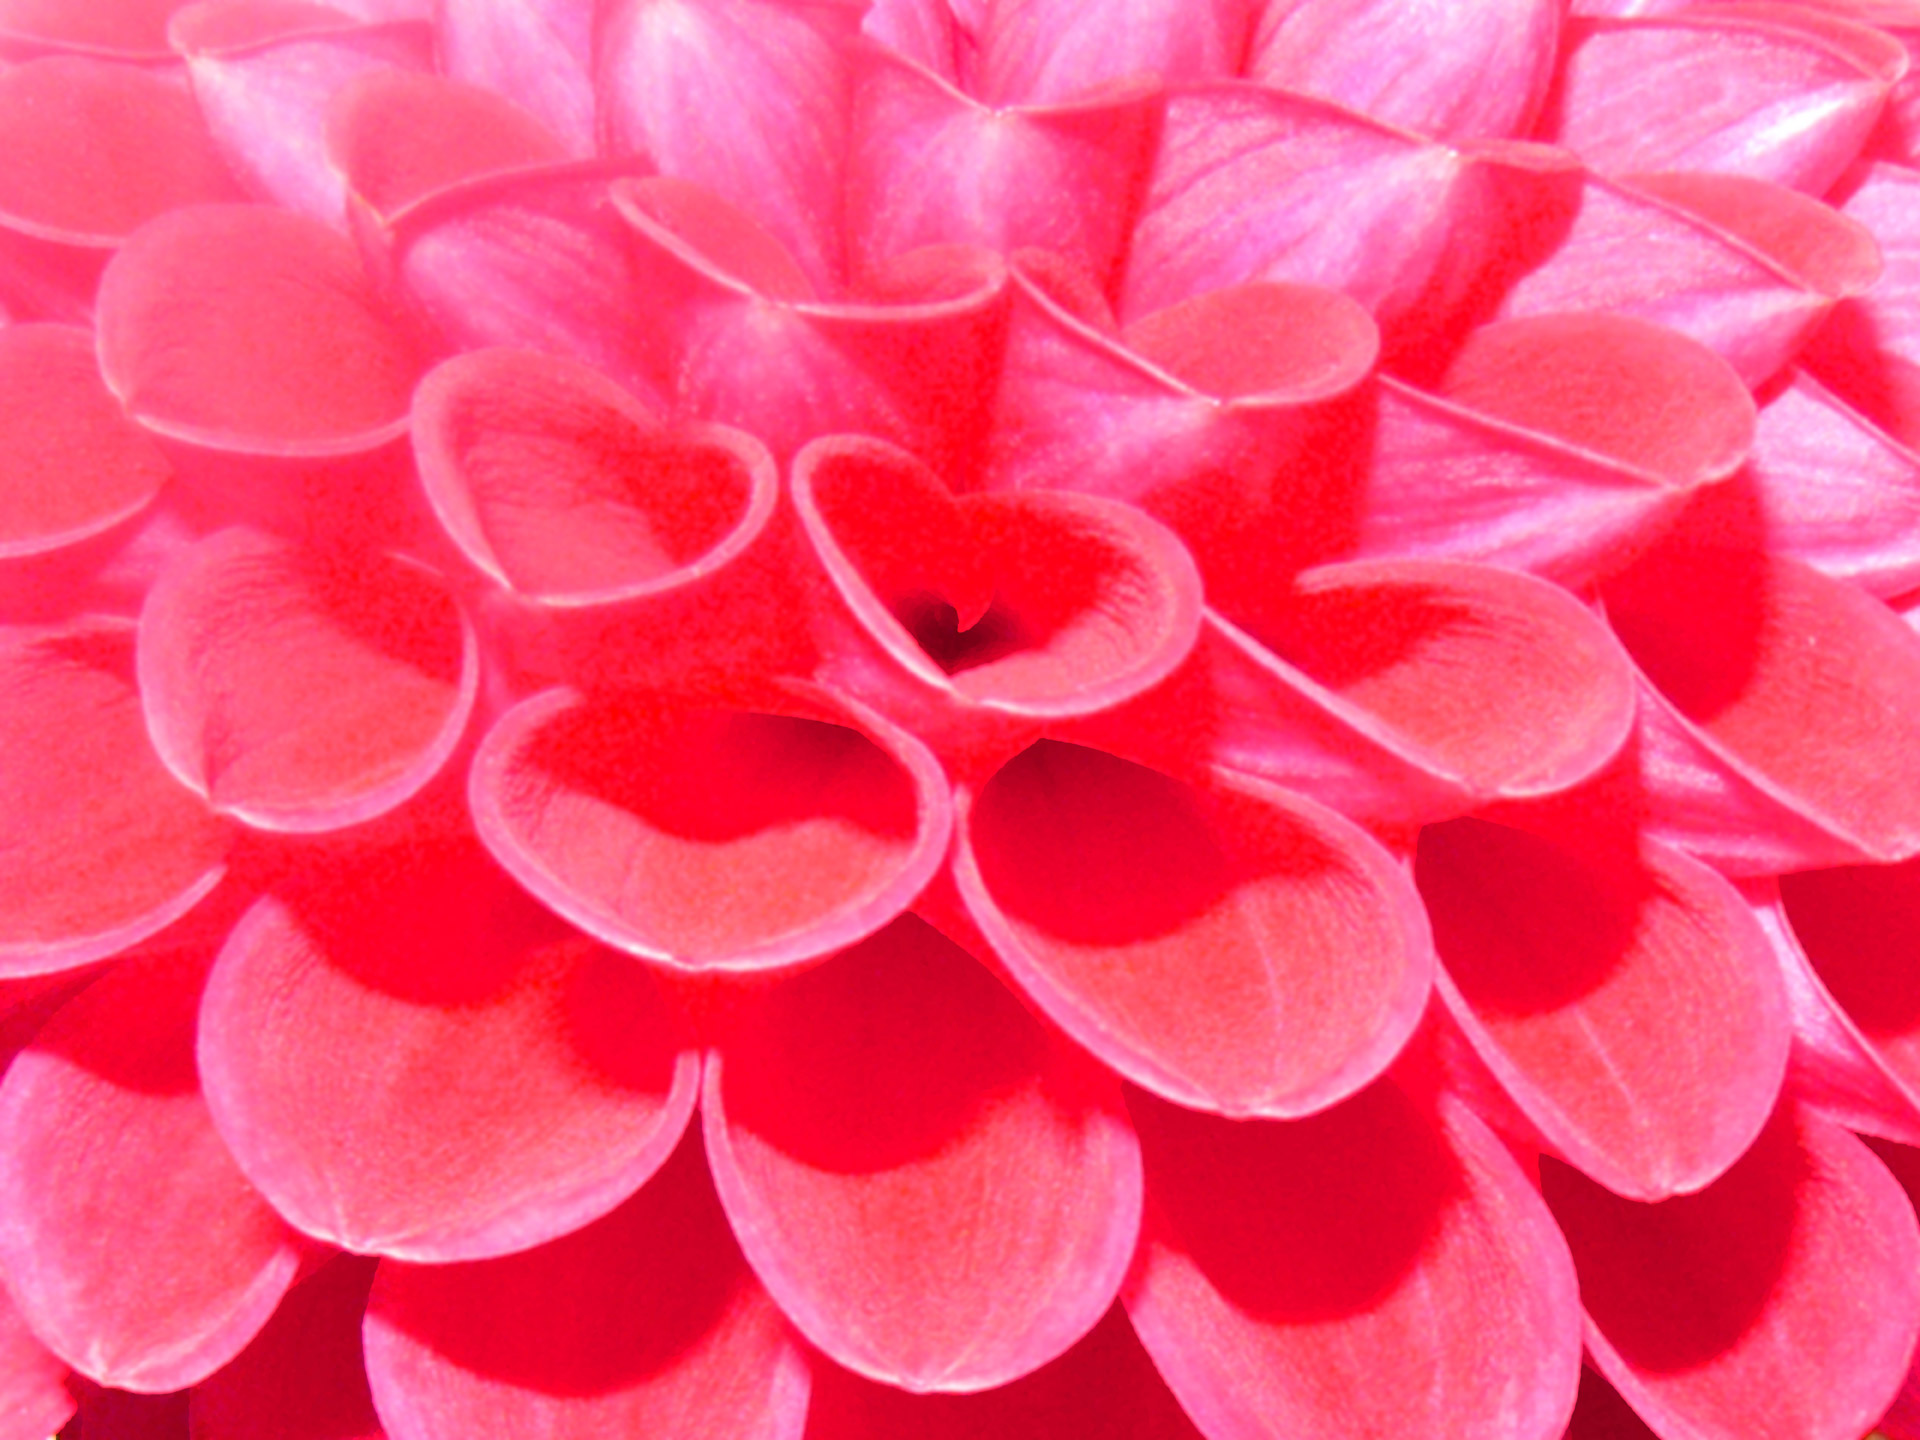 Closeup painted artistic view of red flower petals